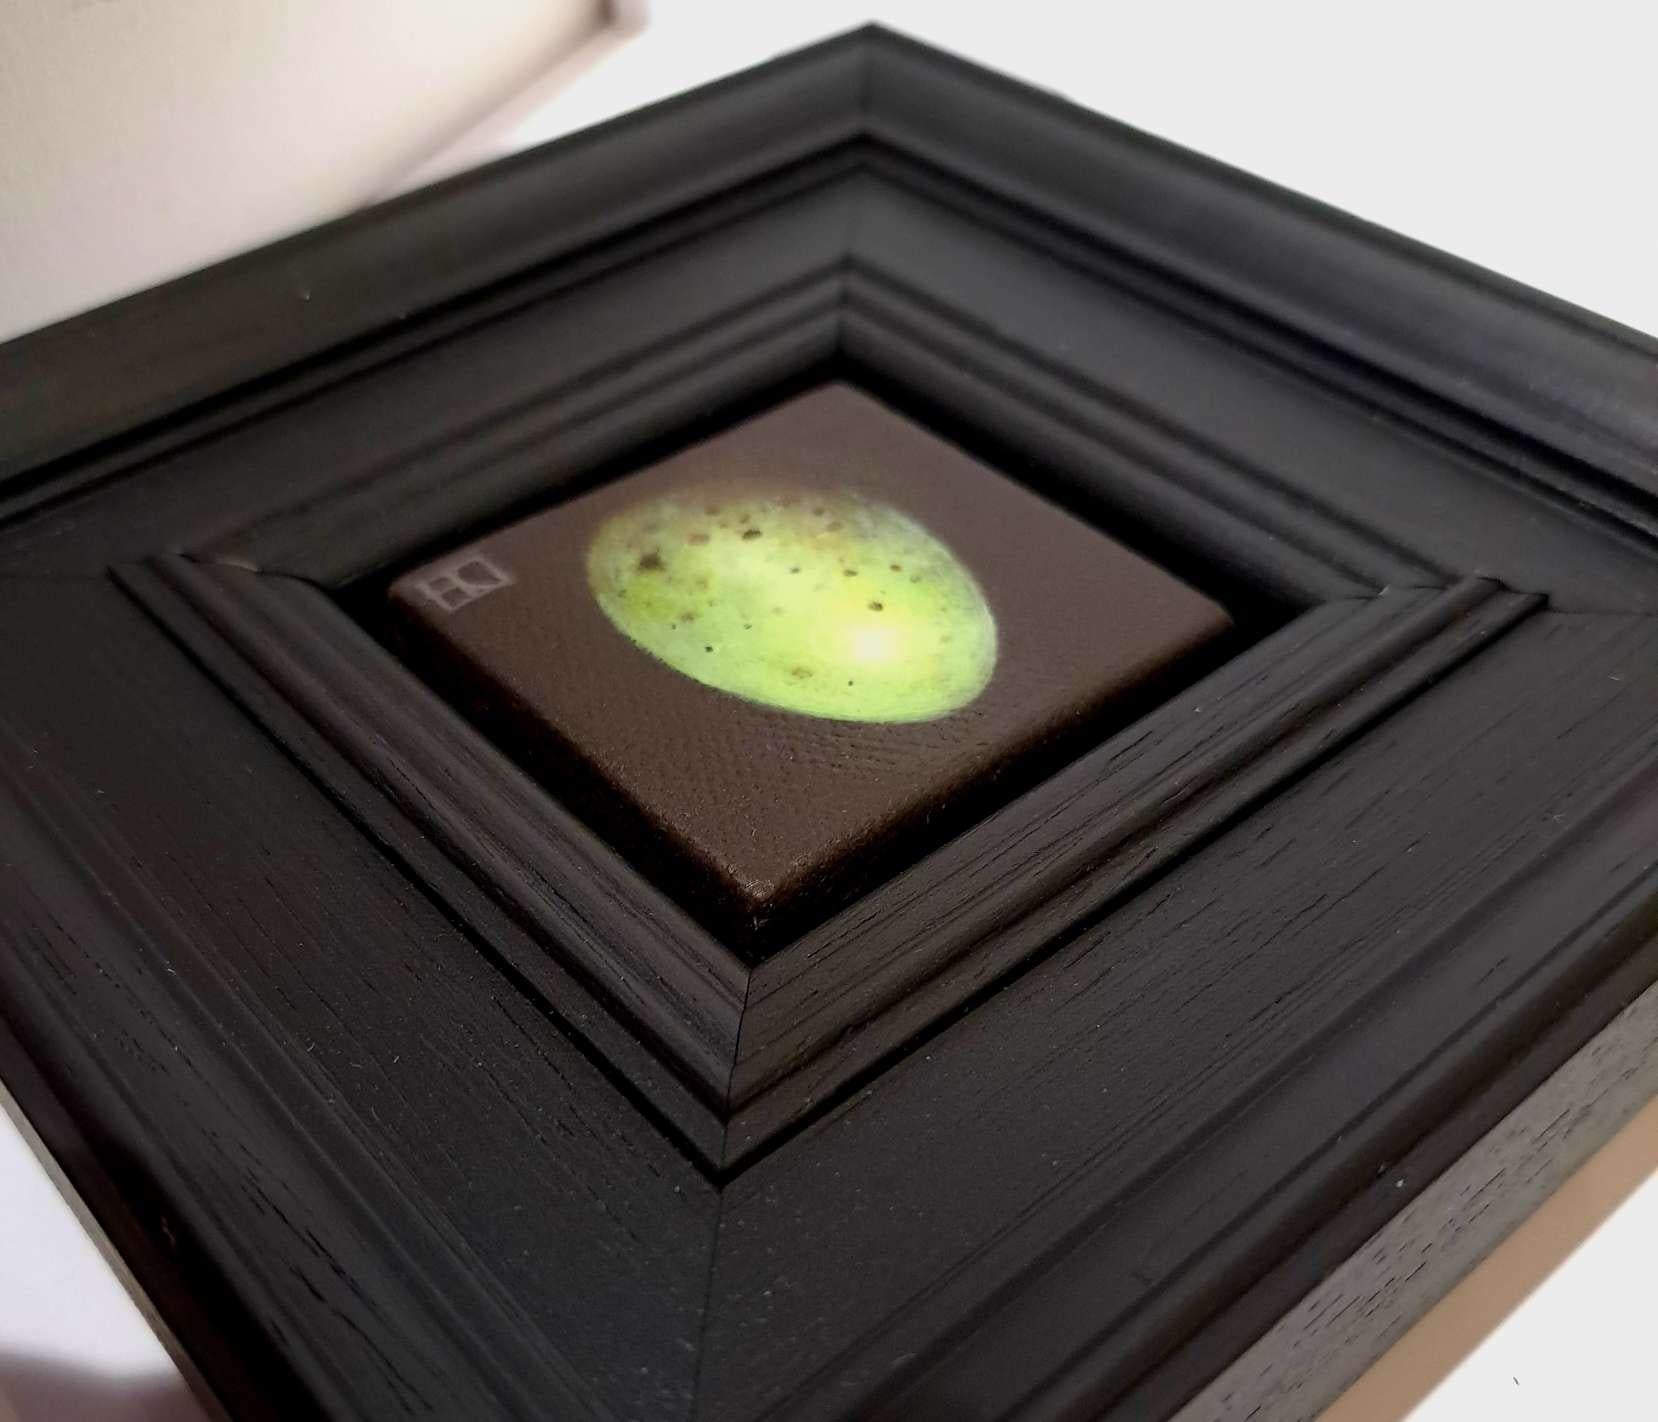 Pocket Song Sparrow Egg is an original oil painting by Dani Humberstone as part of her Pocket Painting series featuring small scale realistic oil paintings, with a nod to baroque still life painting. The paintings are set in a black wood layered